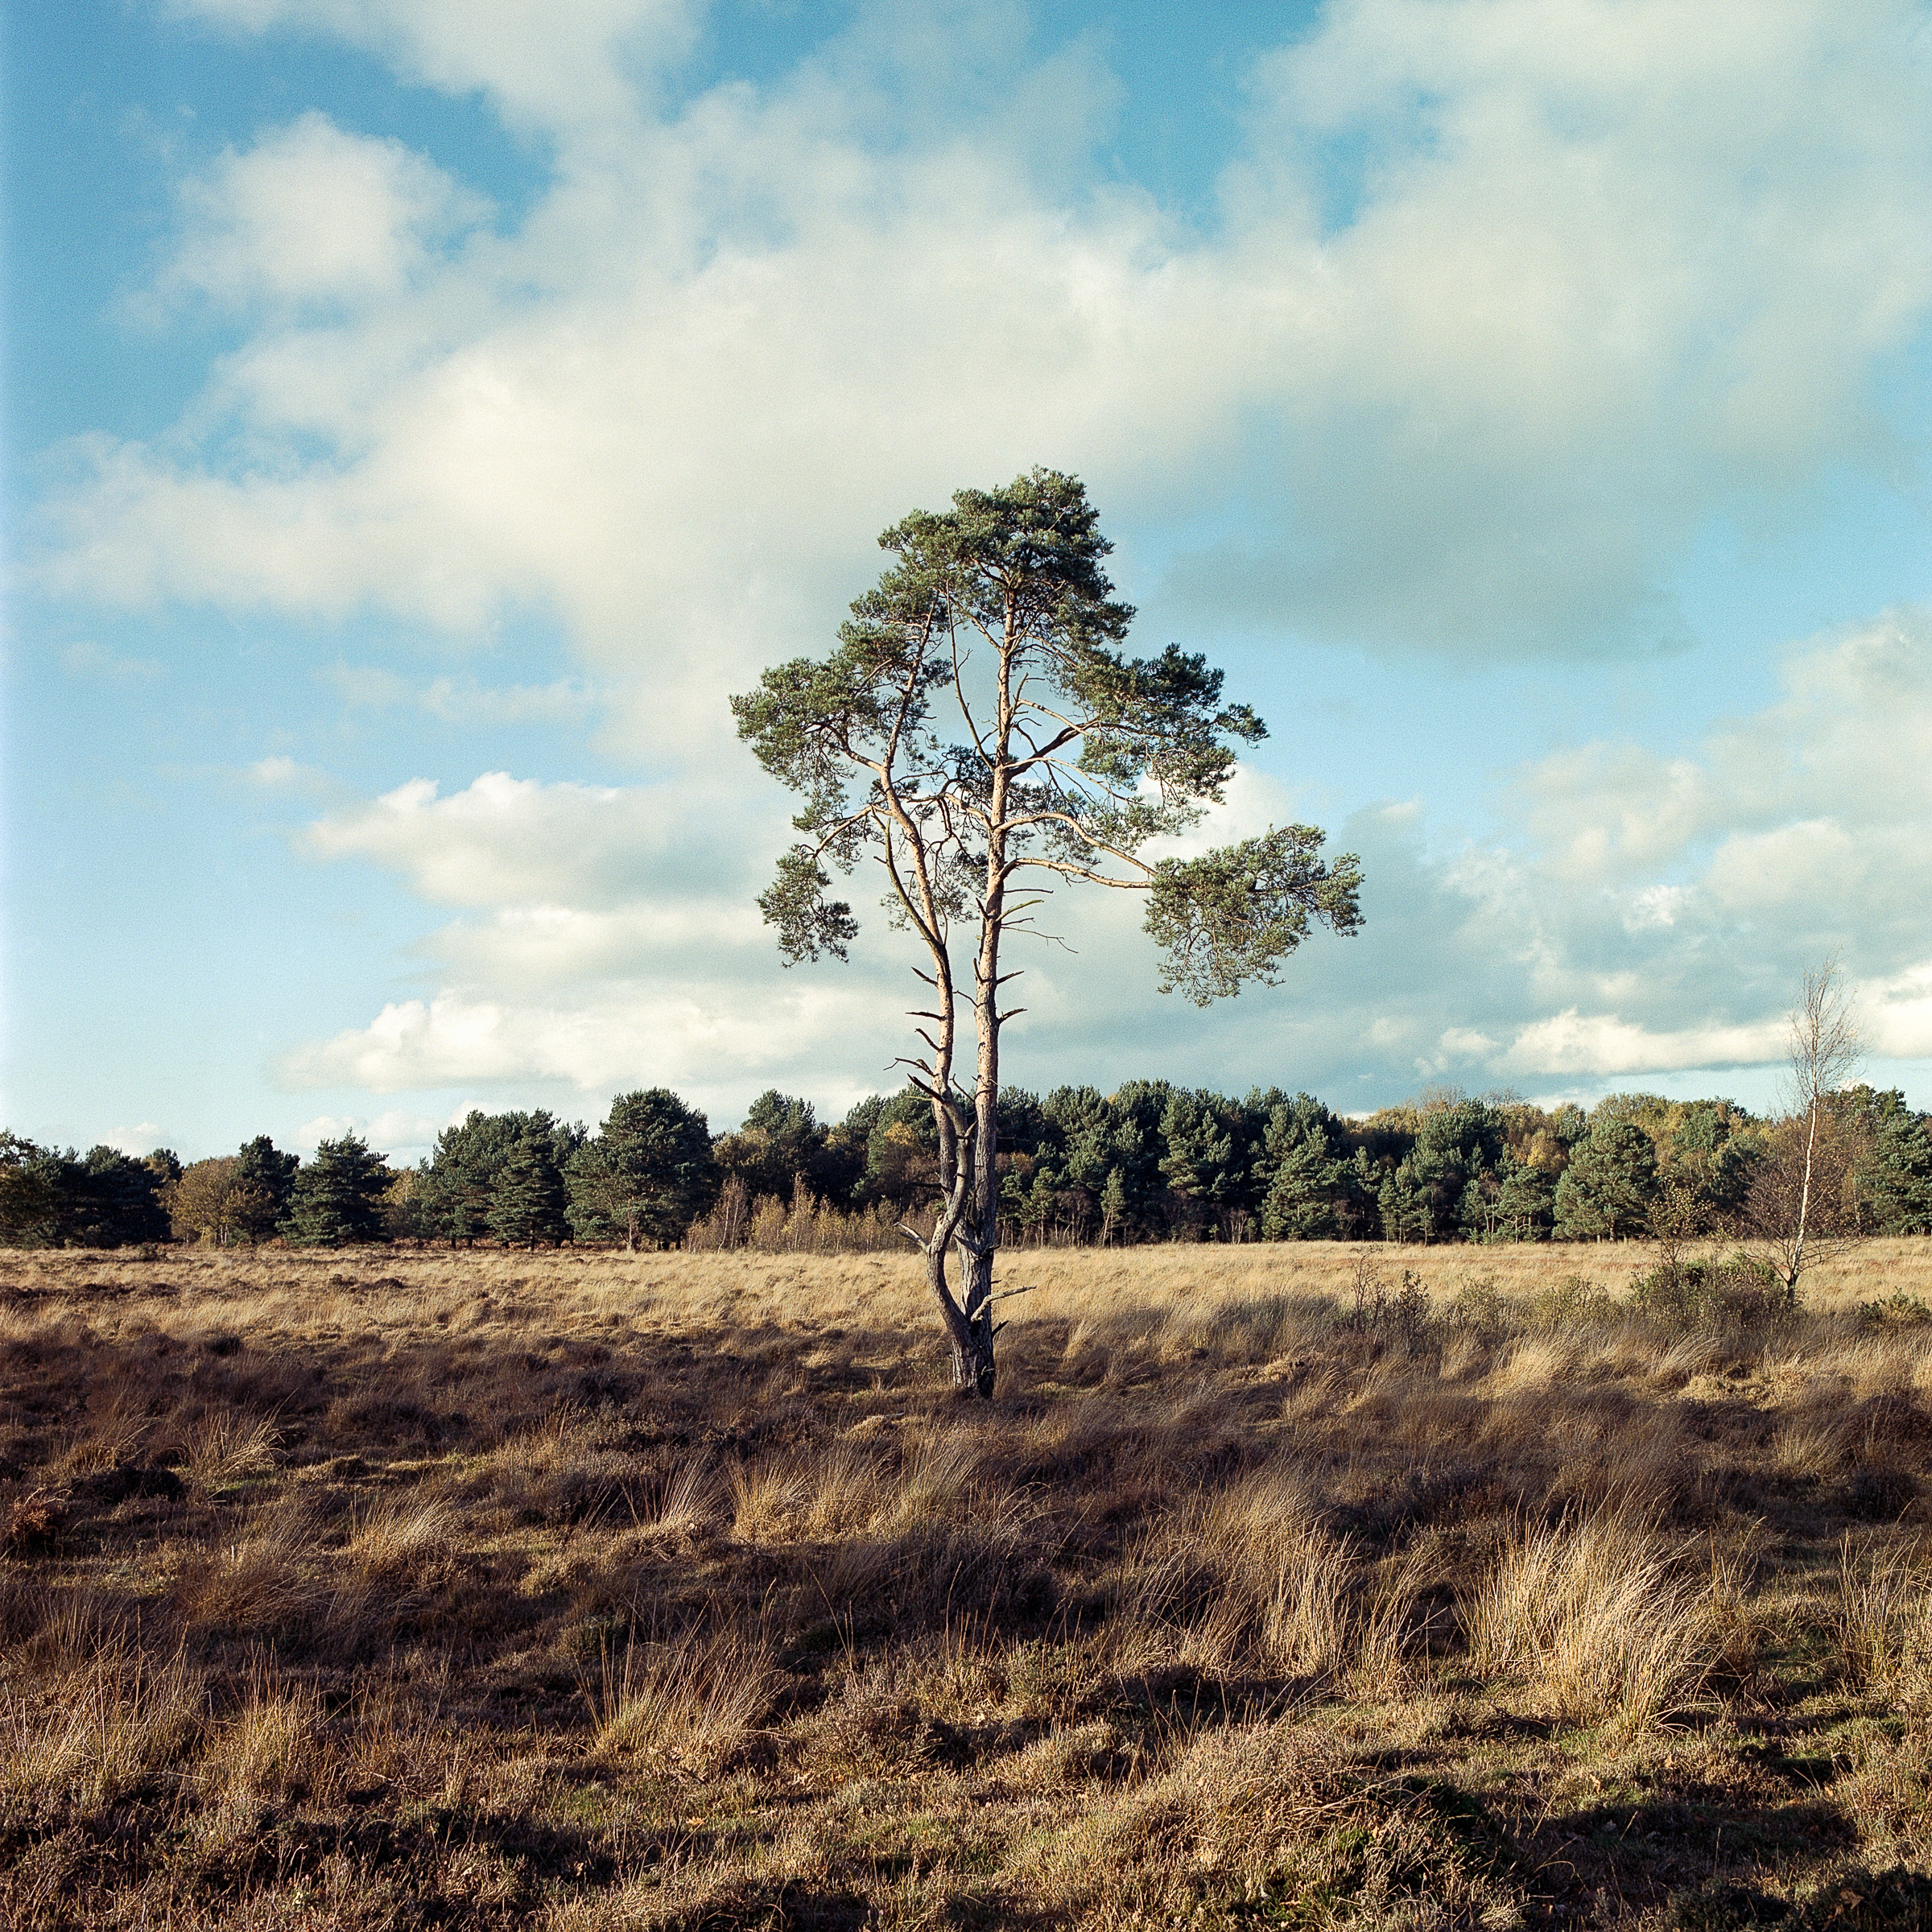 Skipwith Common | Hasselblad | 60mm | Portra 400 | Mark Hillyer